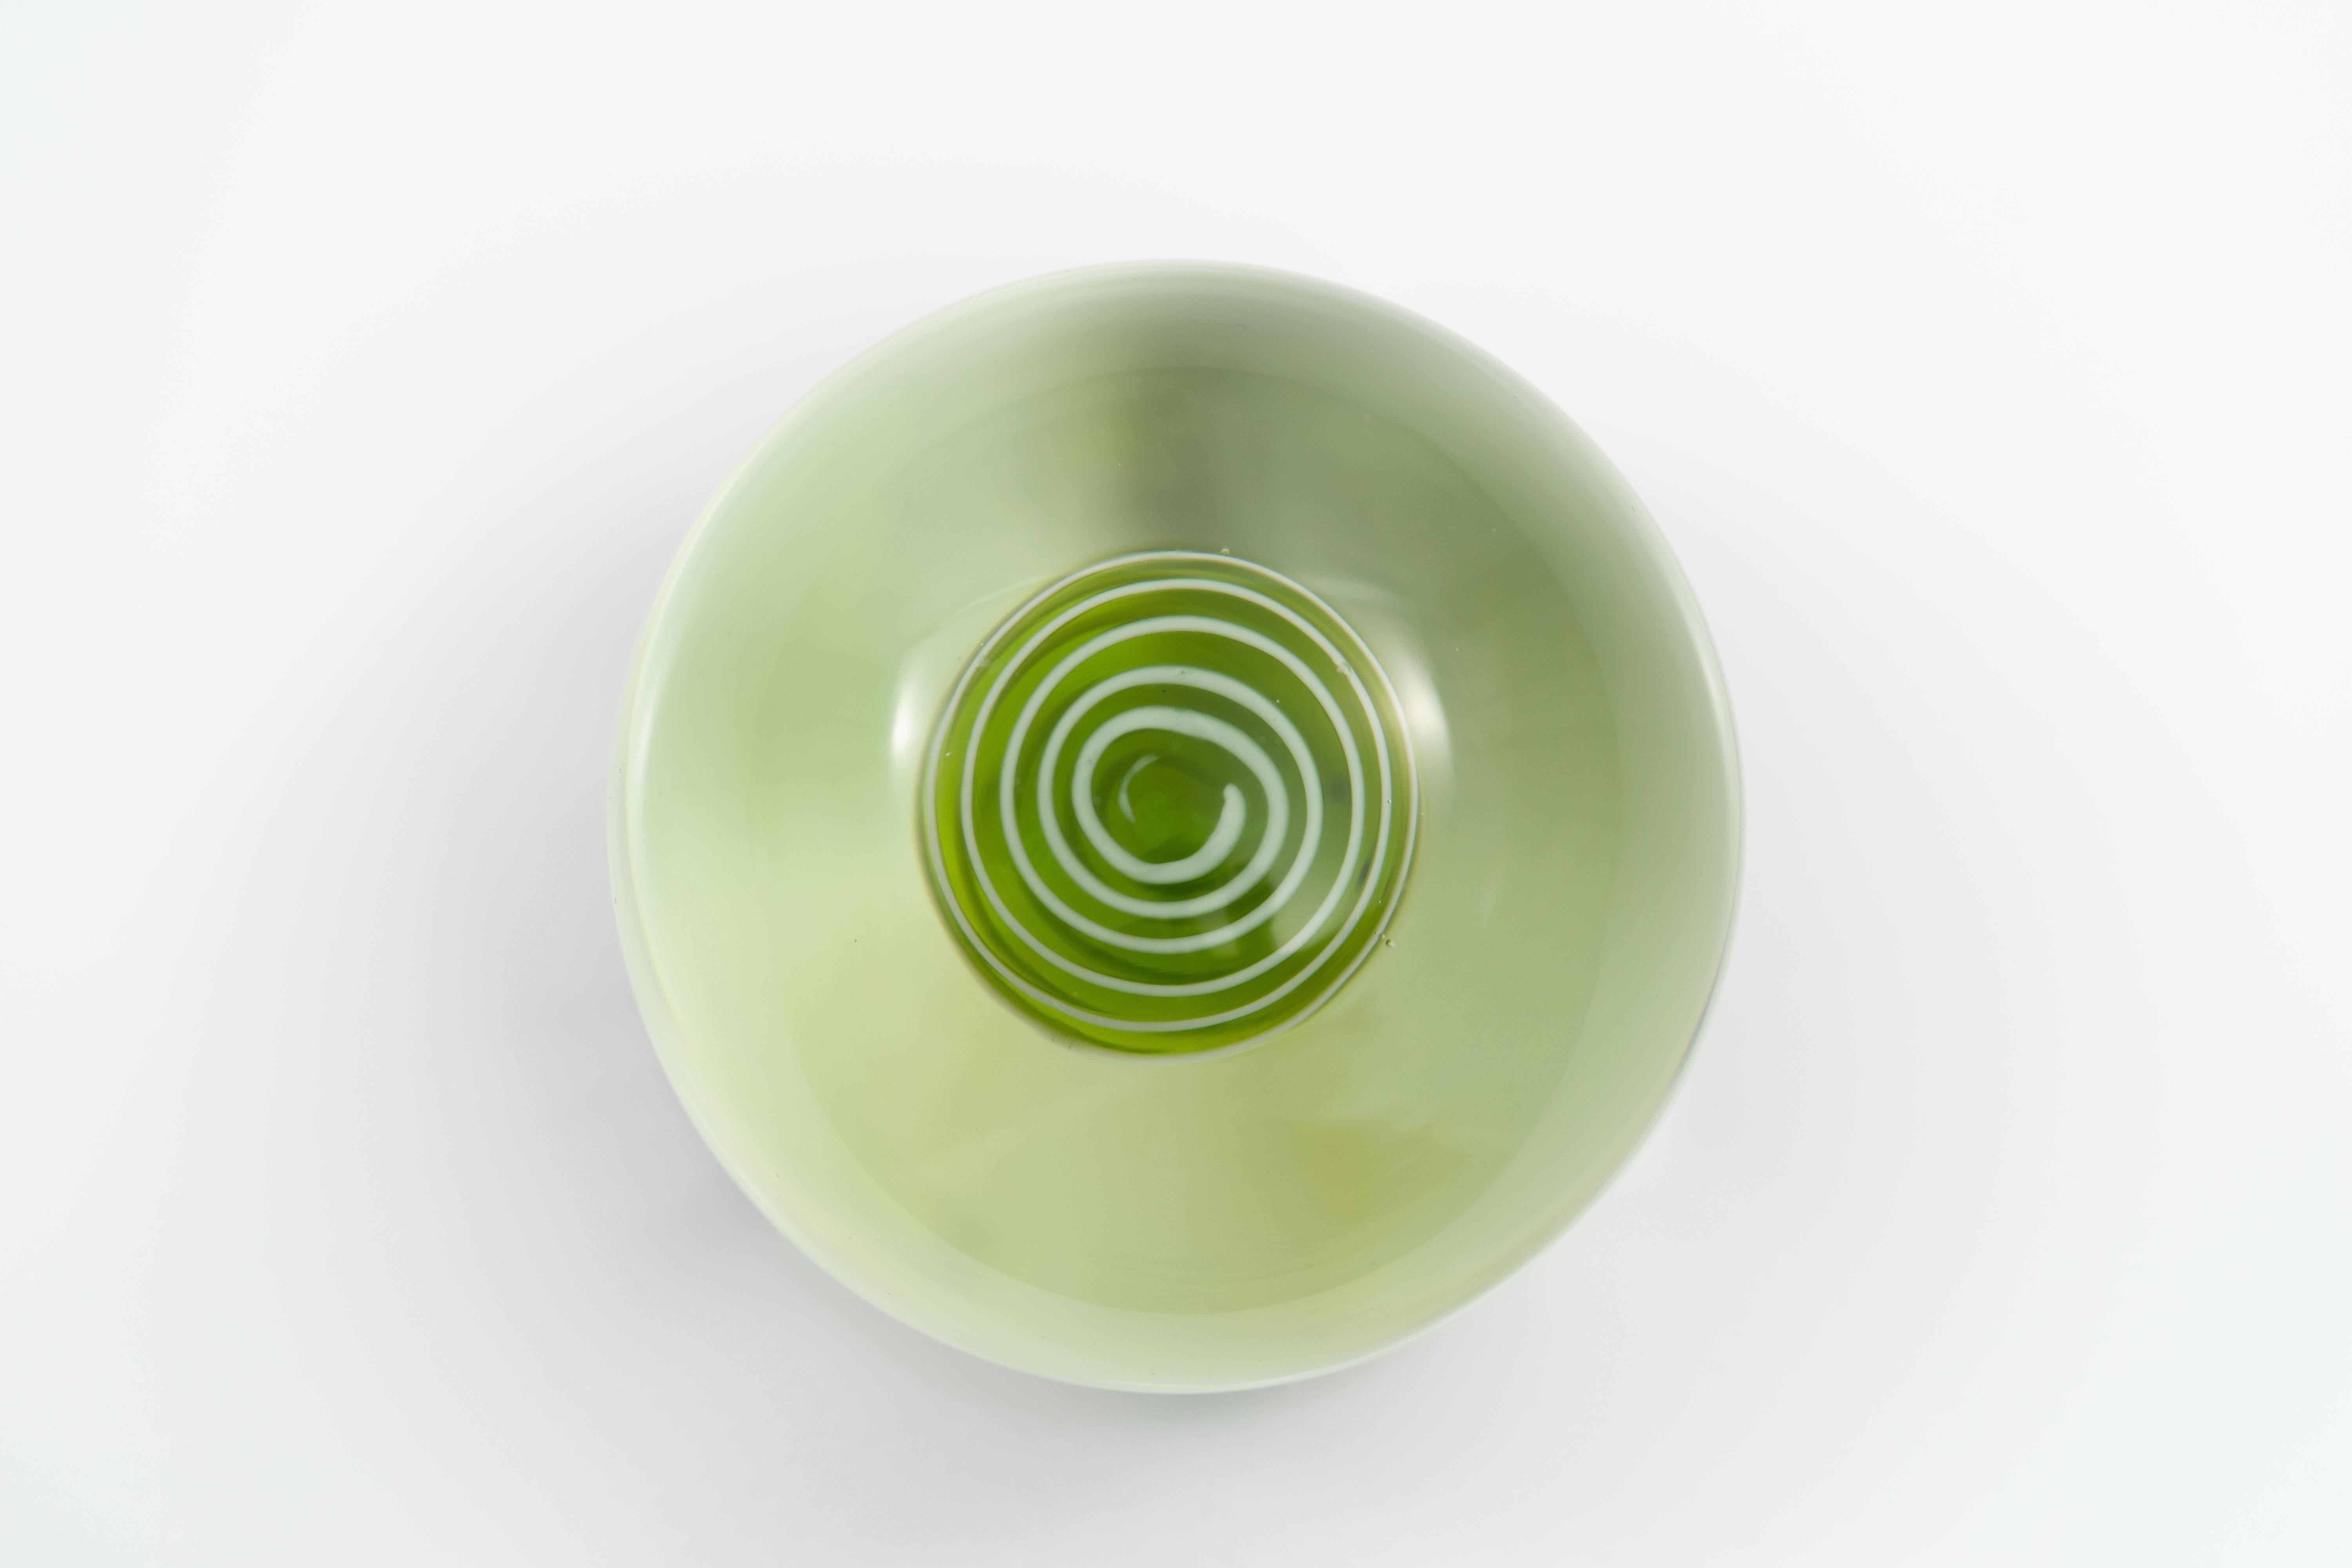 Large Murano Glass Paperweight with Green and White Swirled Core by Salviati 1